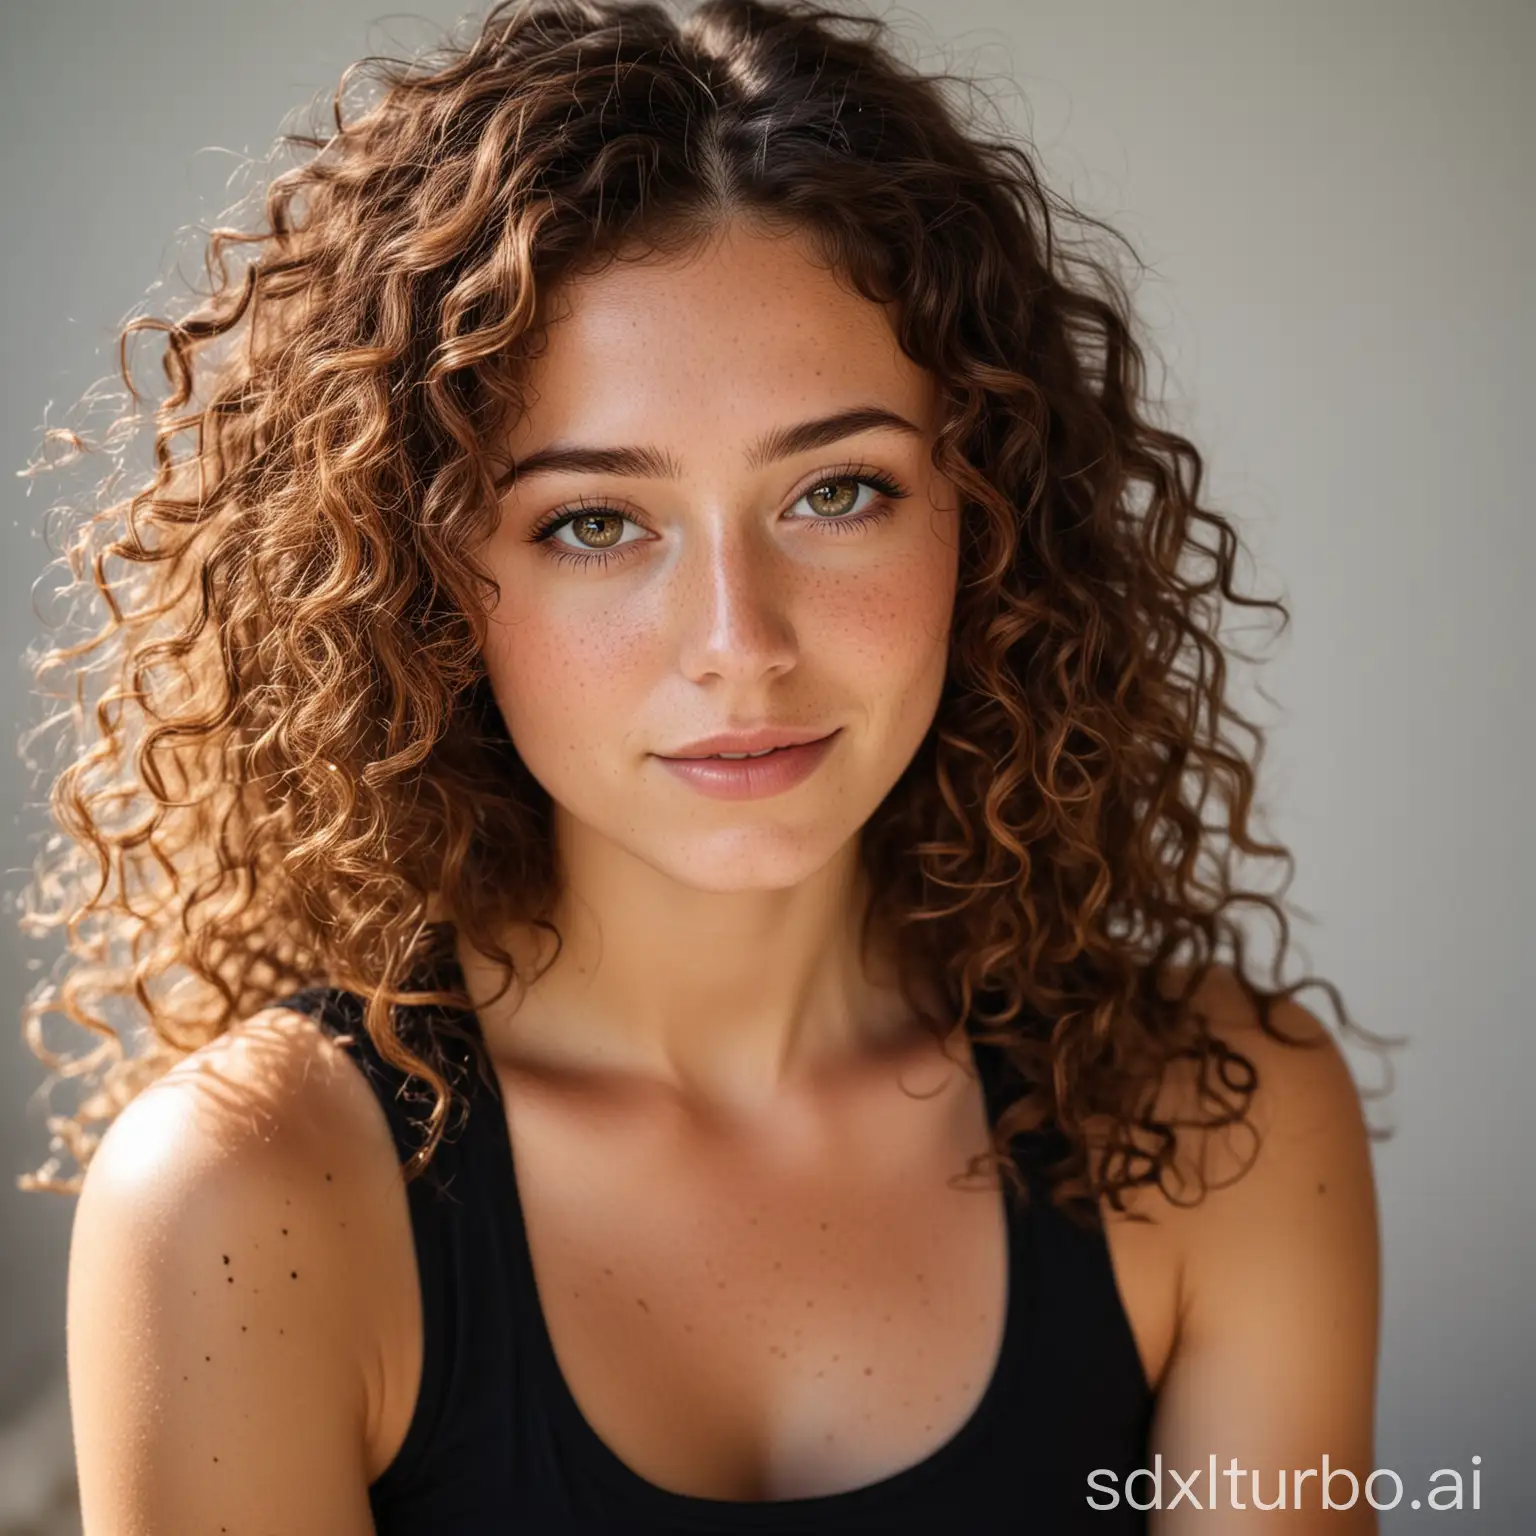 beautiful woman, wearing black tank top, freckles, hd image, brown eyes, curly hair, medium view, natural light, candid photography